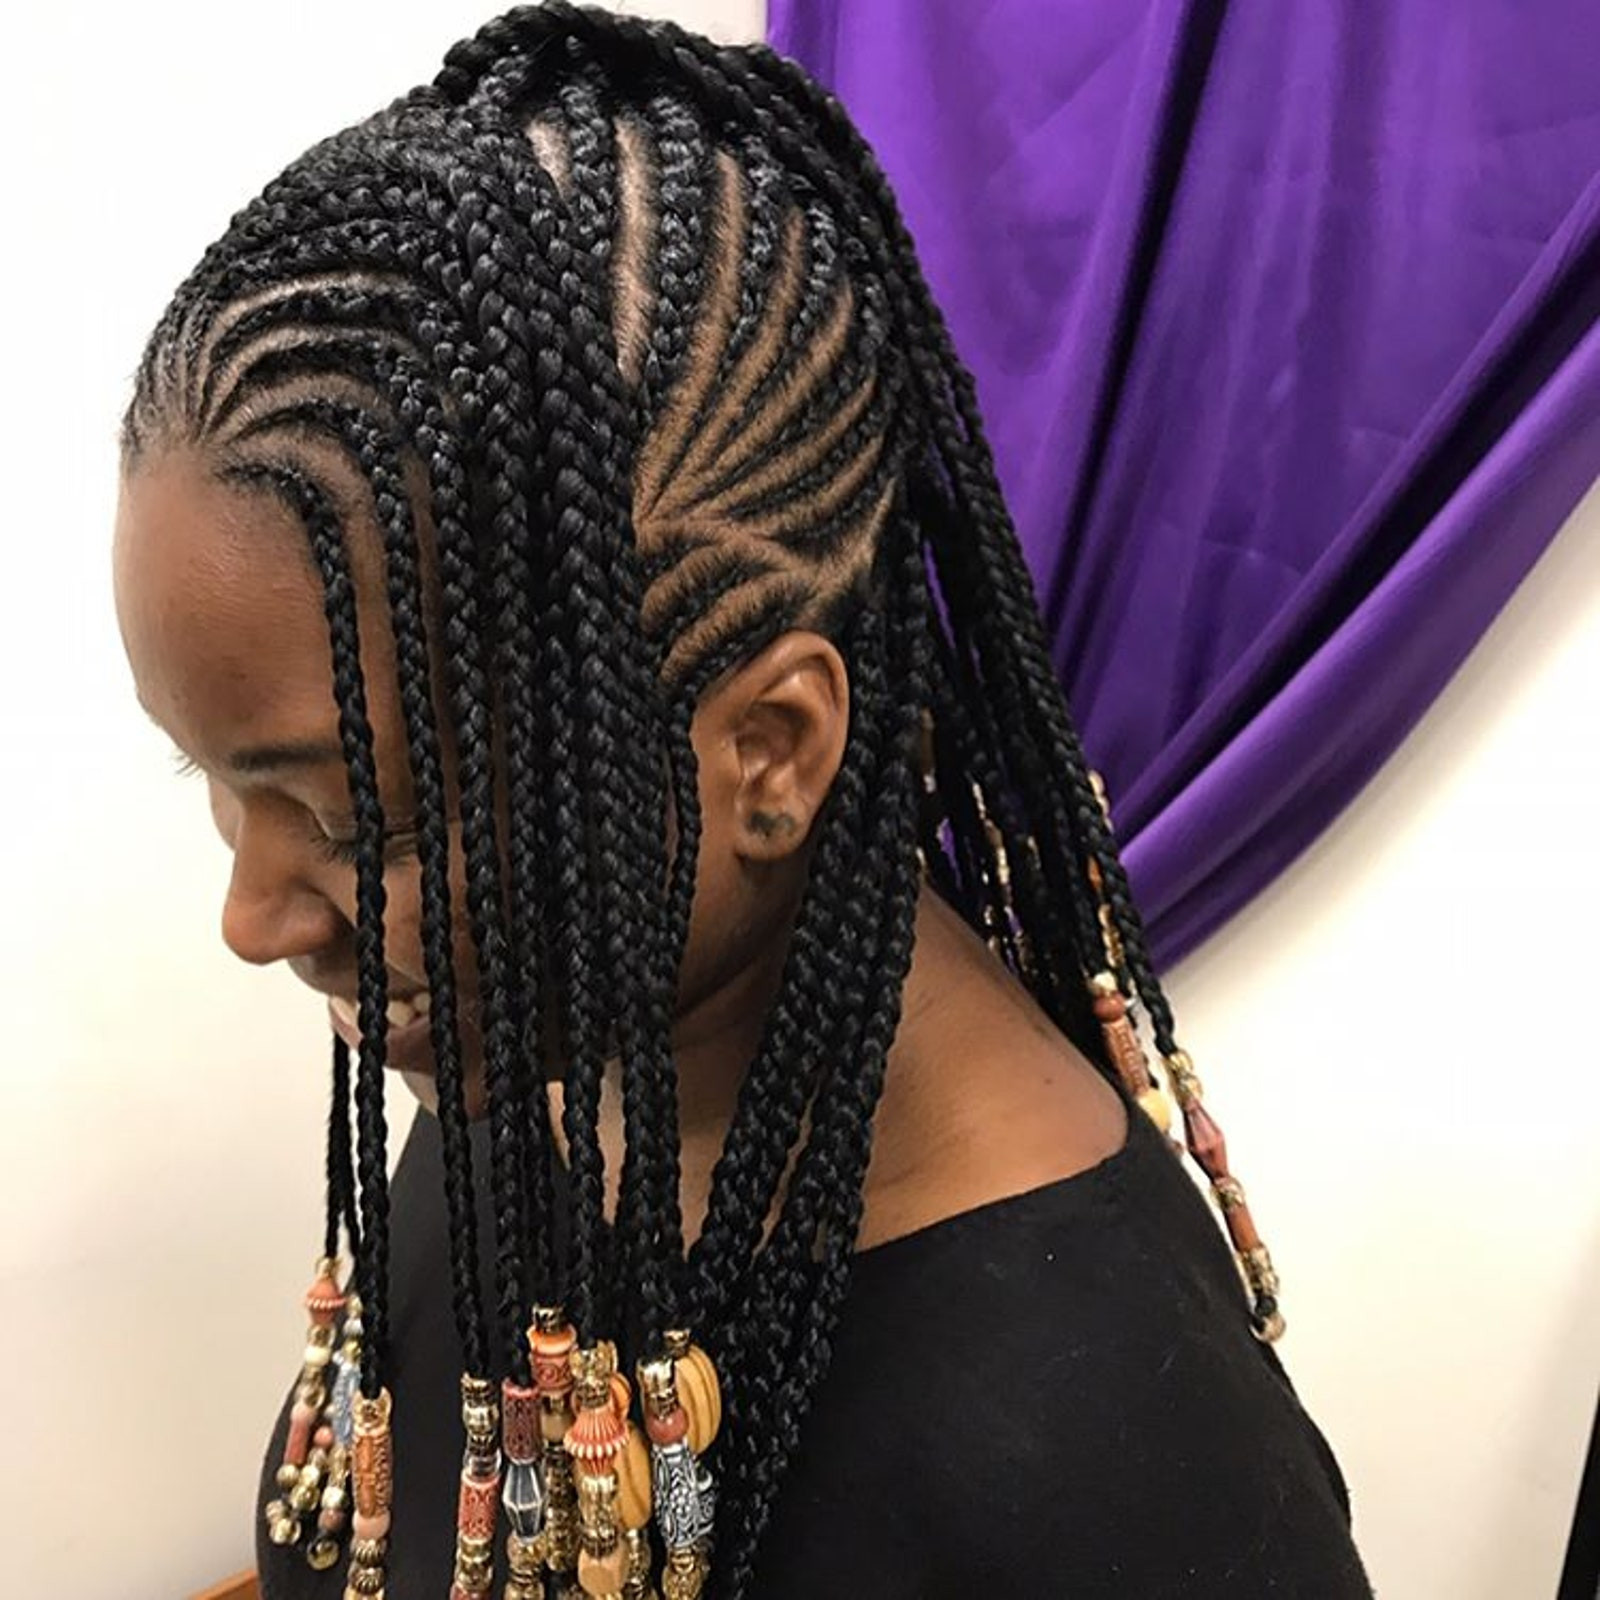 Hairstyles With Braids
 12 Gorgeous Braided Hairstyles With Beads From Instagram